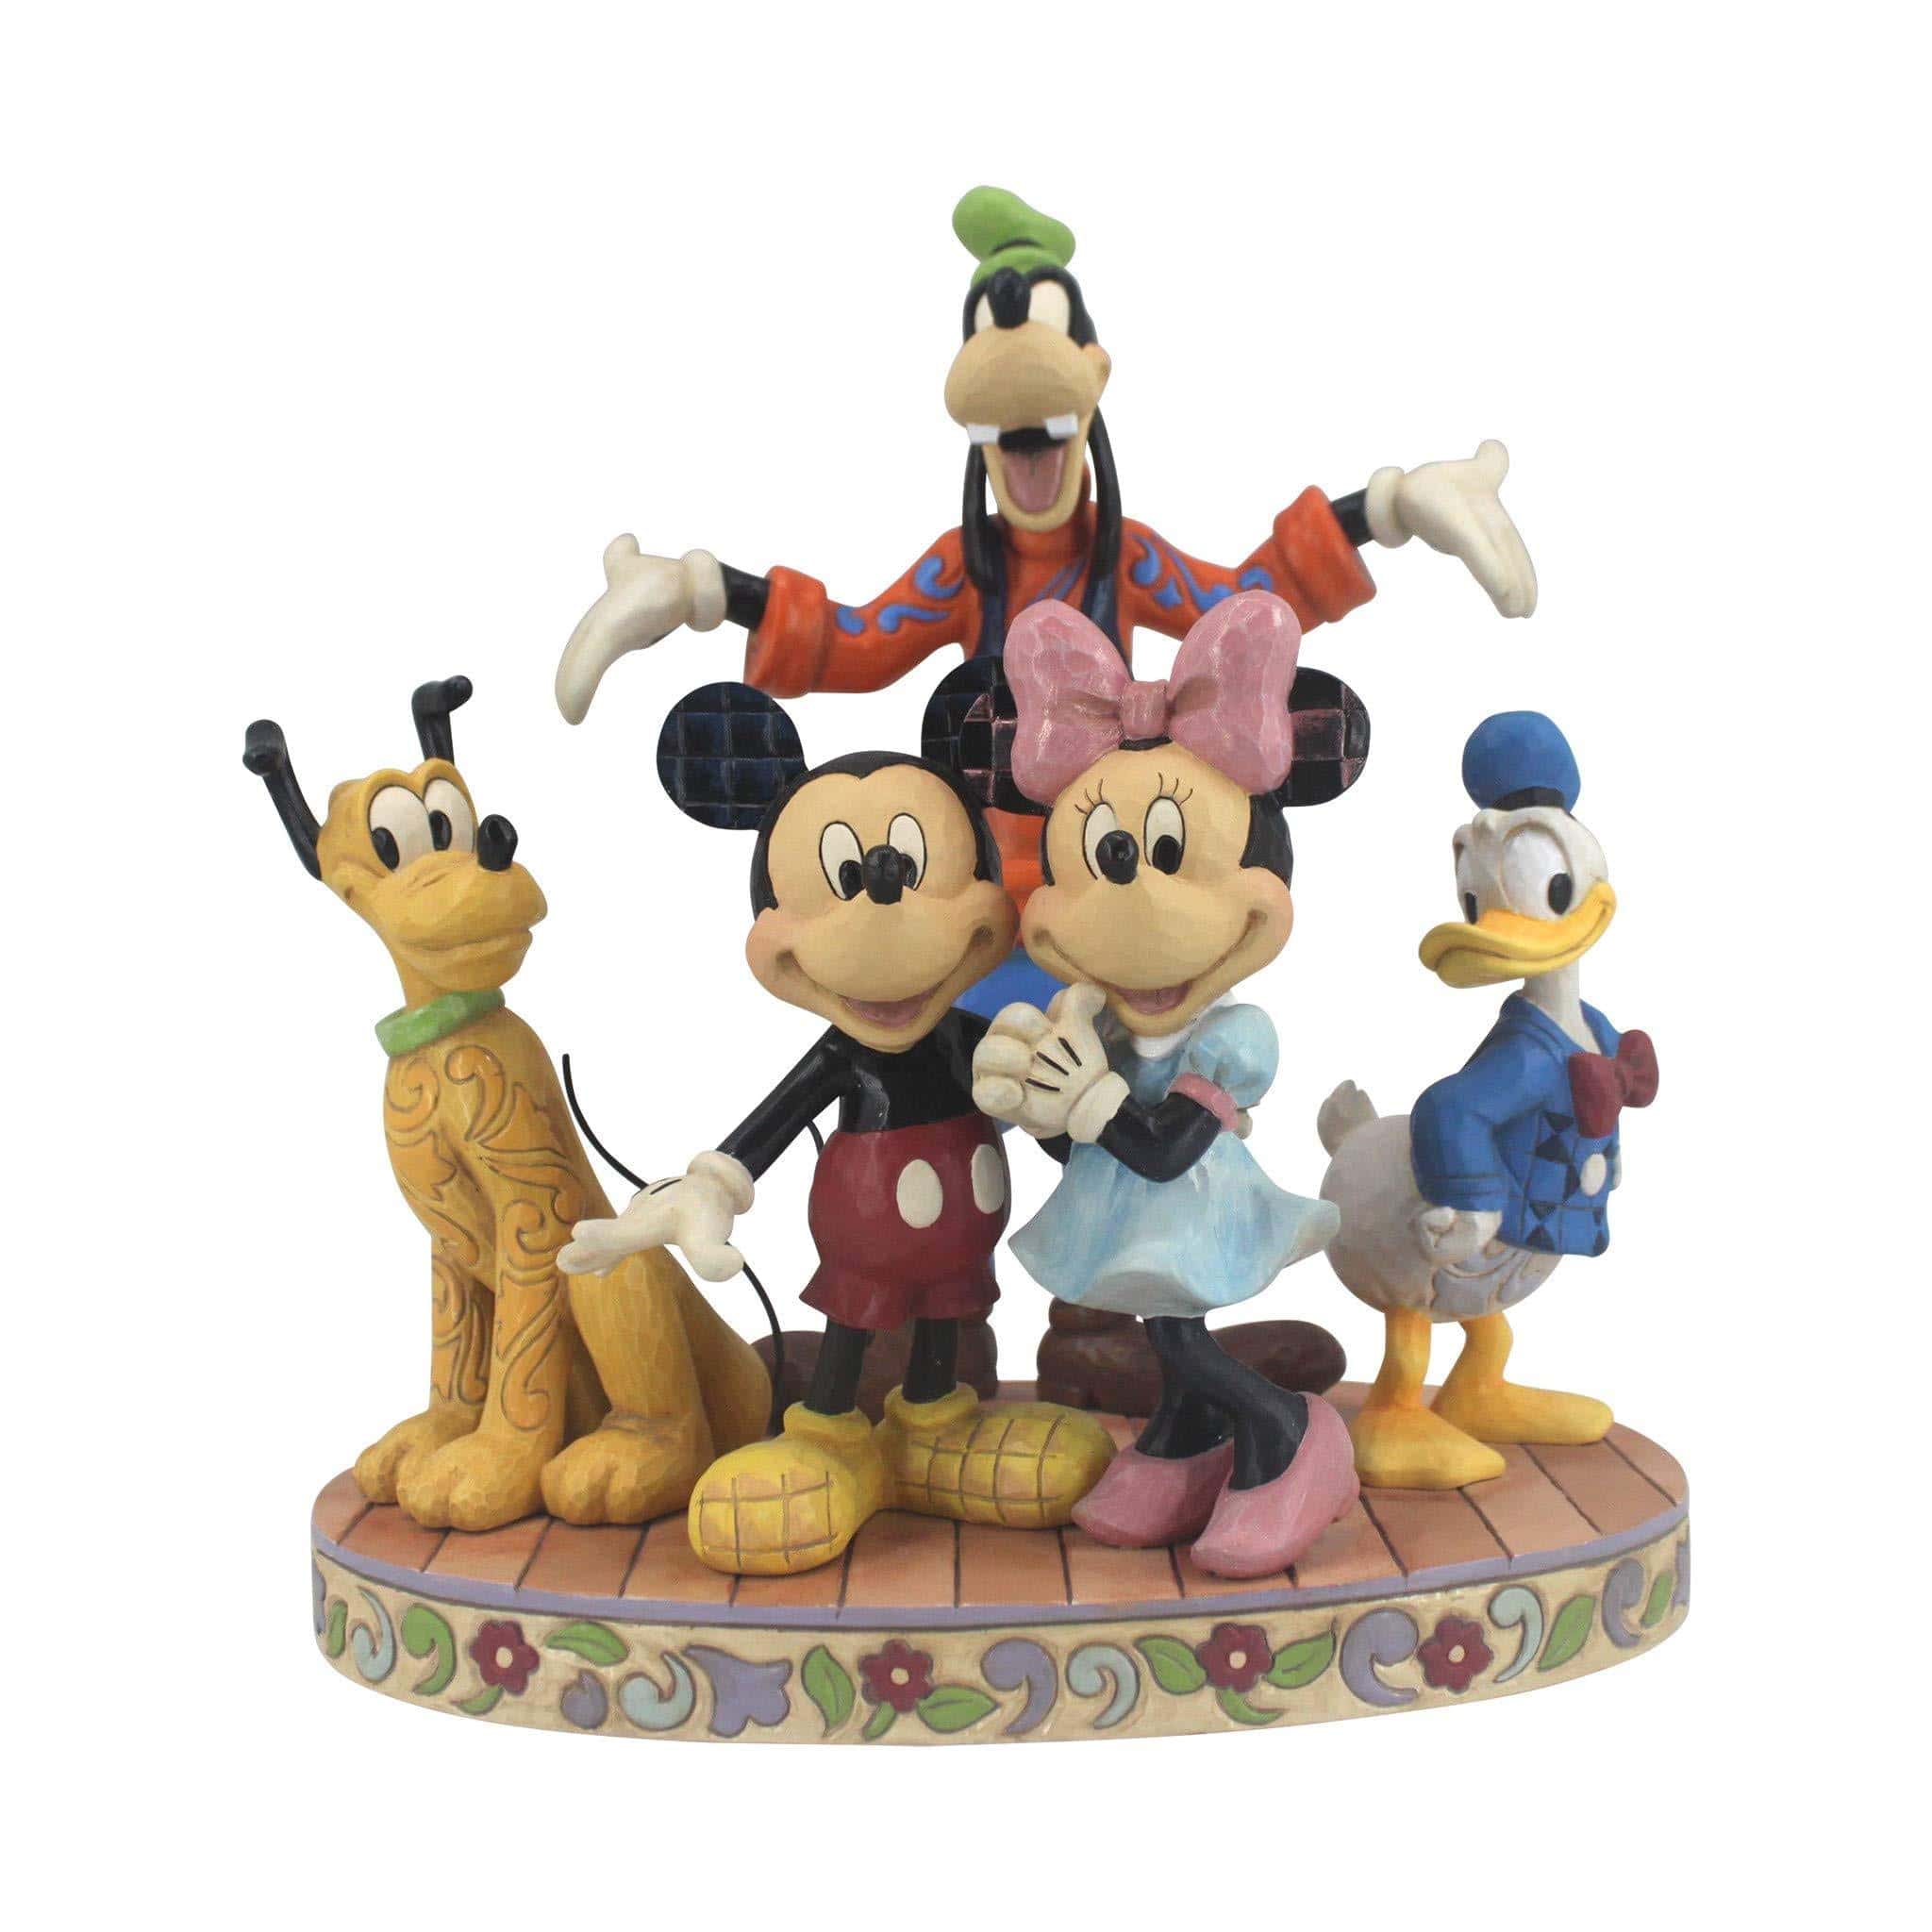 Enesco Disney Ornament Disney Traditions Figurine - The Gang's All Here - Fab Five